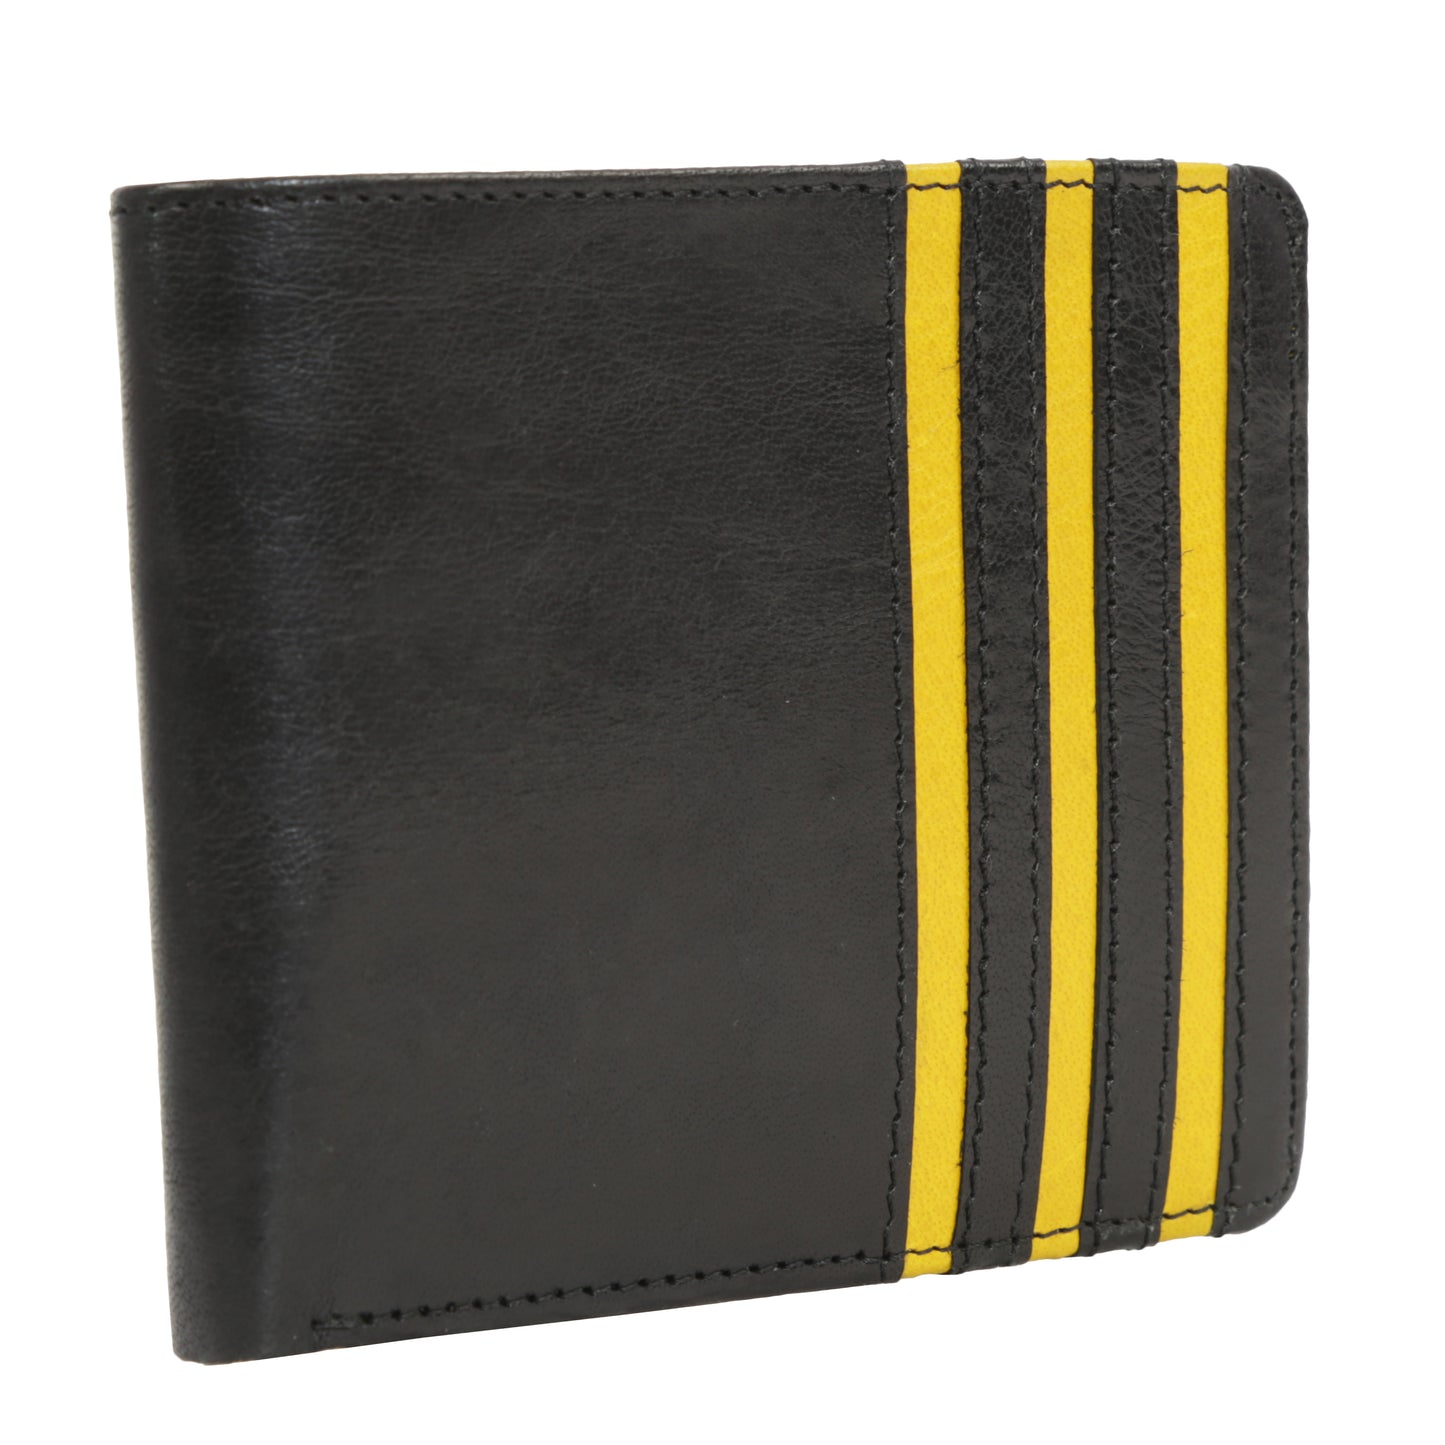 Pilot's Wallet Three stripes by Northman+ : The First officer wallet